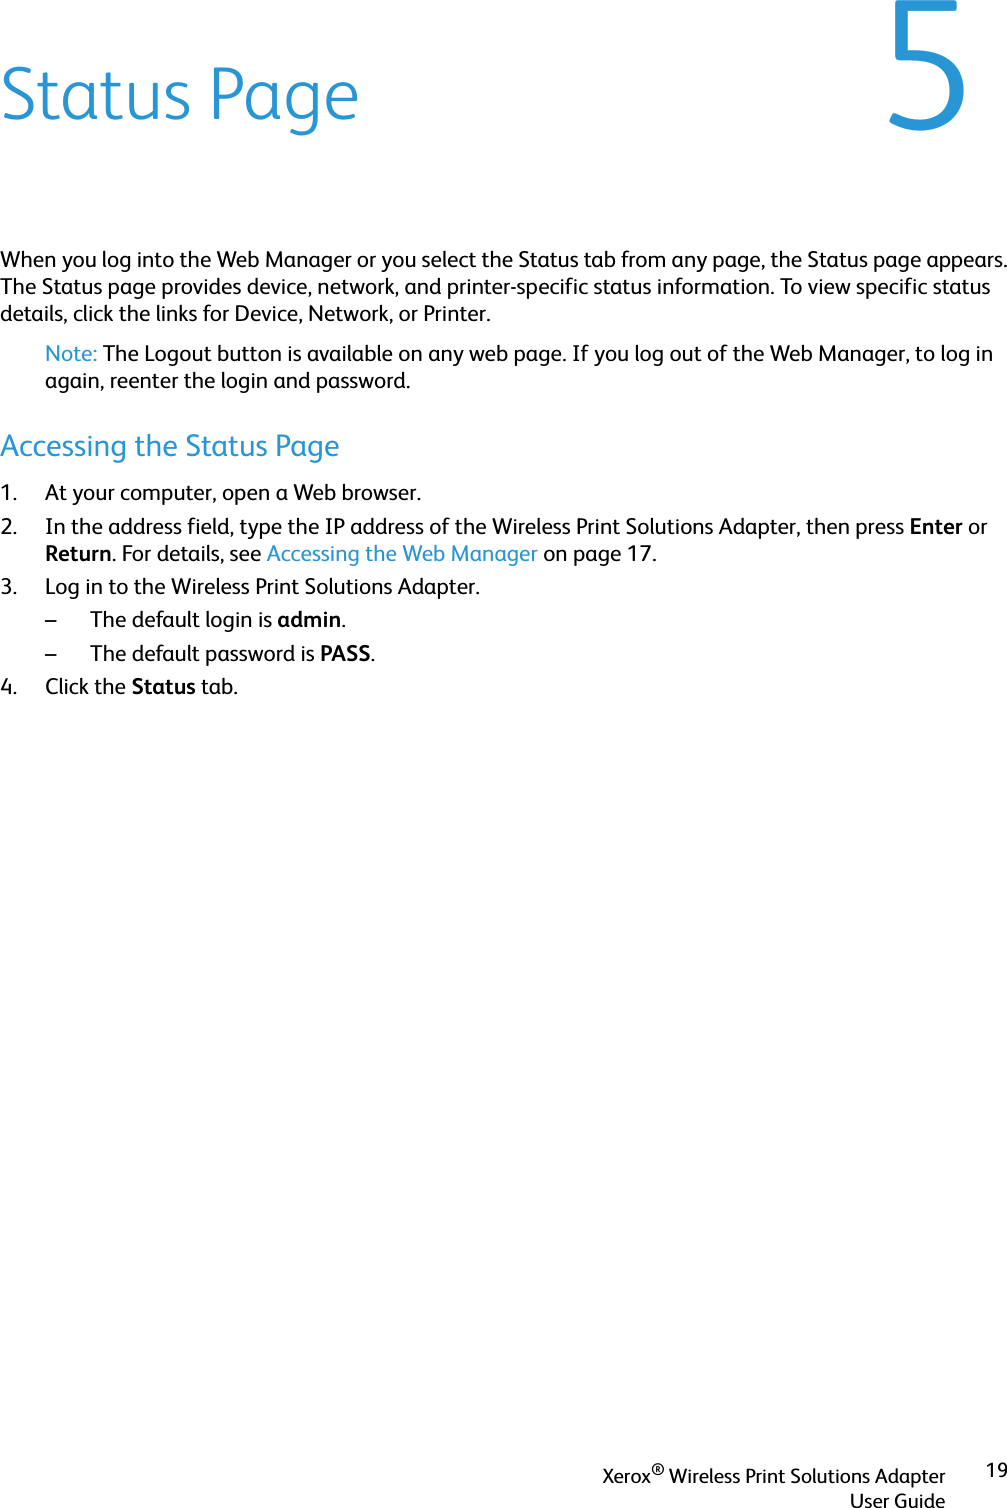 Xerox® Wireless Print Solutions AdapterUser Guide195Status PageWhen you log into the Web Manager or you select the Status tab from any page, the Status page appears. The Status page provides device, network, and printer-specific status information. To view specific status details, click the links for Device, Network, or Printer.Note: The Logout button is available on any web page. If you log out of the Web Manager, to log in again, reenter the login and password.Accessing the Status Page1. At your computer, open a Web browser.2. In the address field, type the IP address of the Wireless Print Solutions Adapter, then press Enter or Return. For details, see Accessing the Web Manager on page 17.3. Log in to the Wireless Print Solutions Adapter.– The default login is admin.– The default password is PASS.4. Click the Status tab.